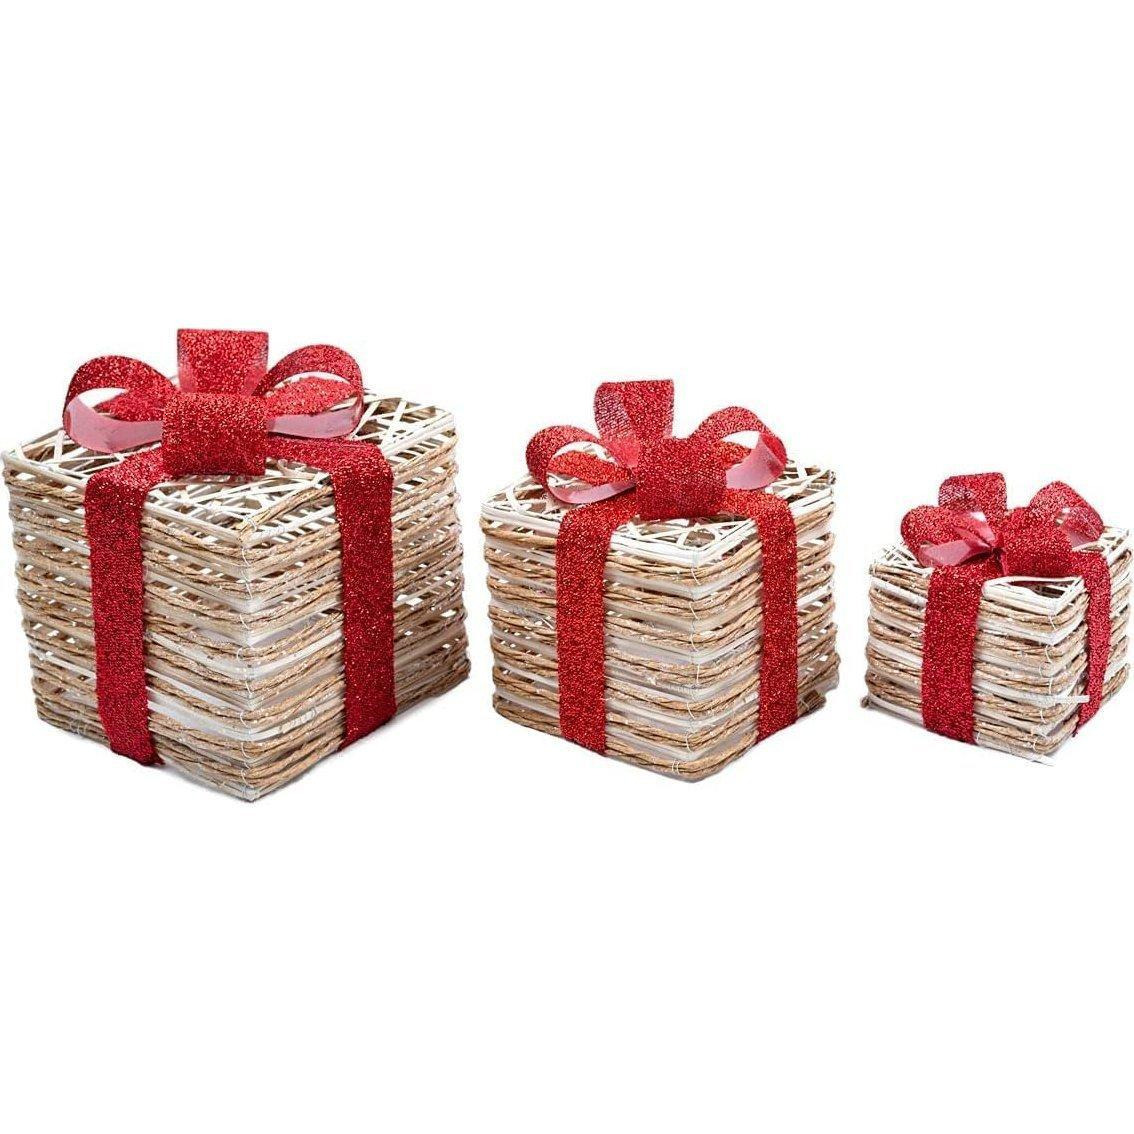 Christmas Parcels Pre-Lit Battery Operated LED Glitter Rattan Xmas Presents Novelty Decorations Set of 3 - White Brown - image 1